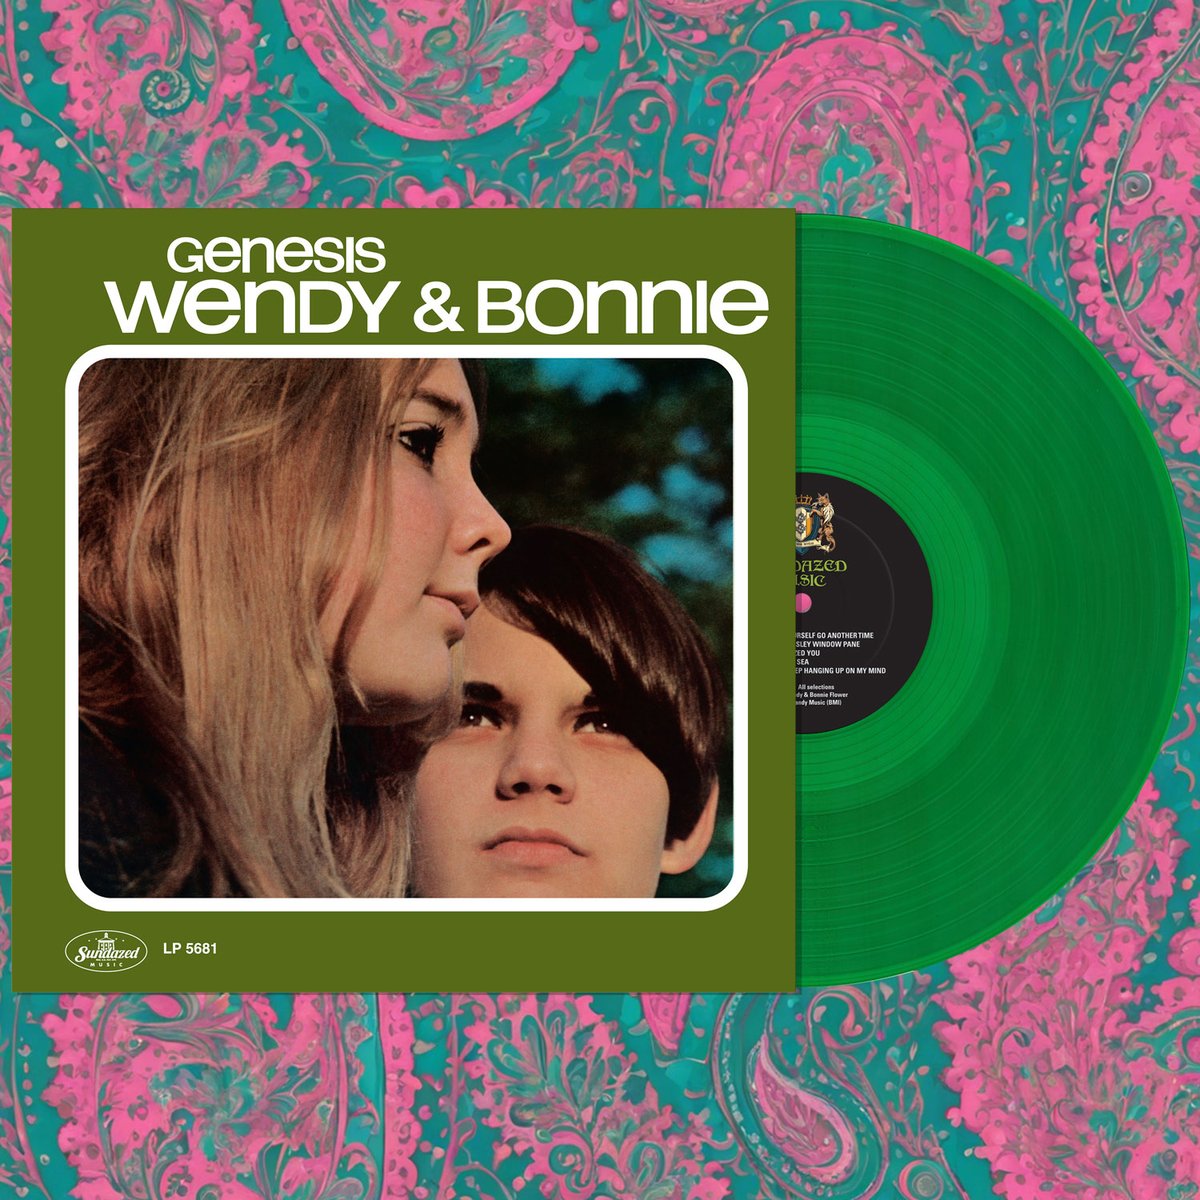 Available 6/28! Sisters Wendy & Bonnie Flower’s radiant sunshine pop, breezy melodic arrangements and sophisticated soft rock flourishes make this a must-hear album! Live in a record store desert? Order here: sundazed.com/c/279-Wendy-Bo…